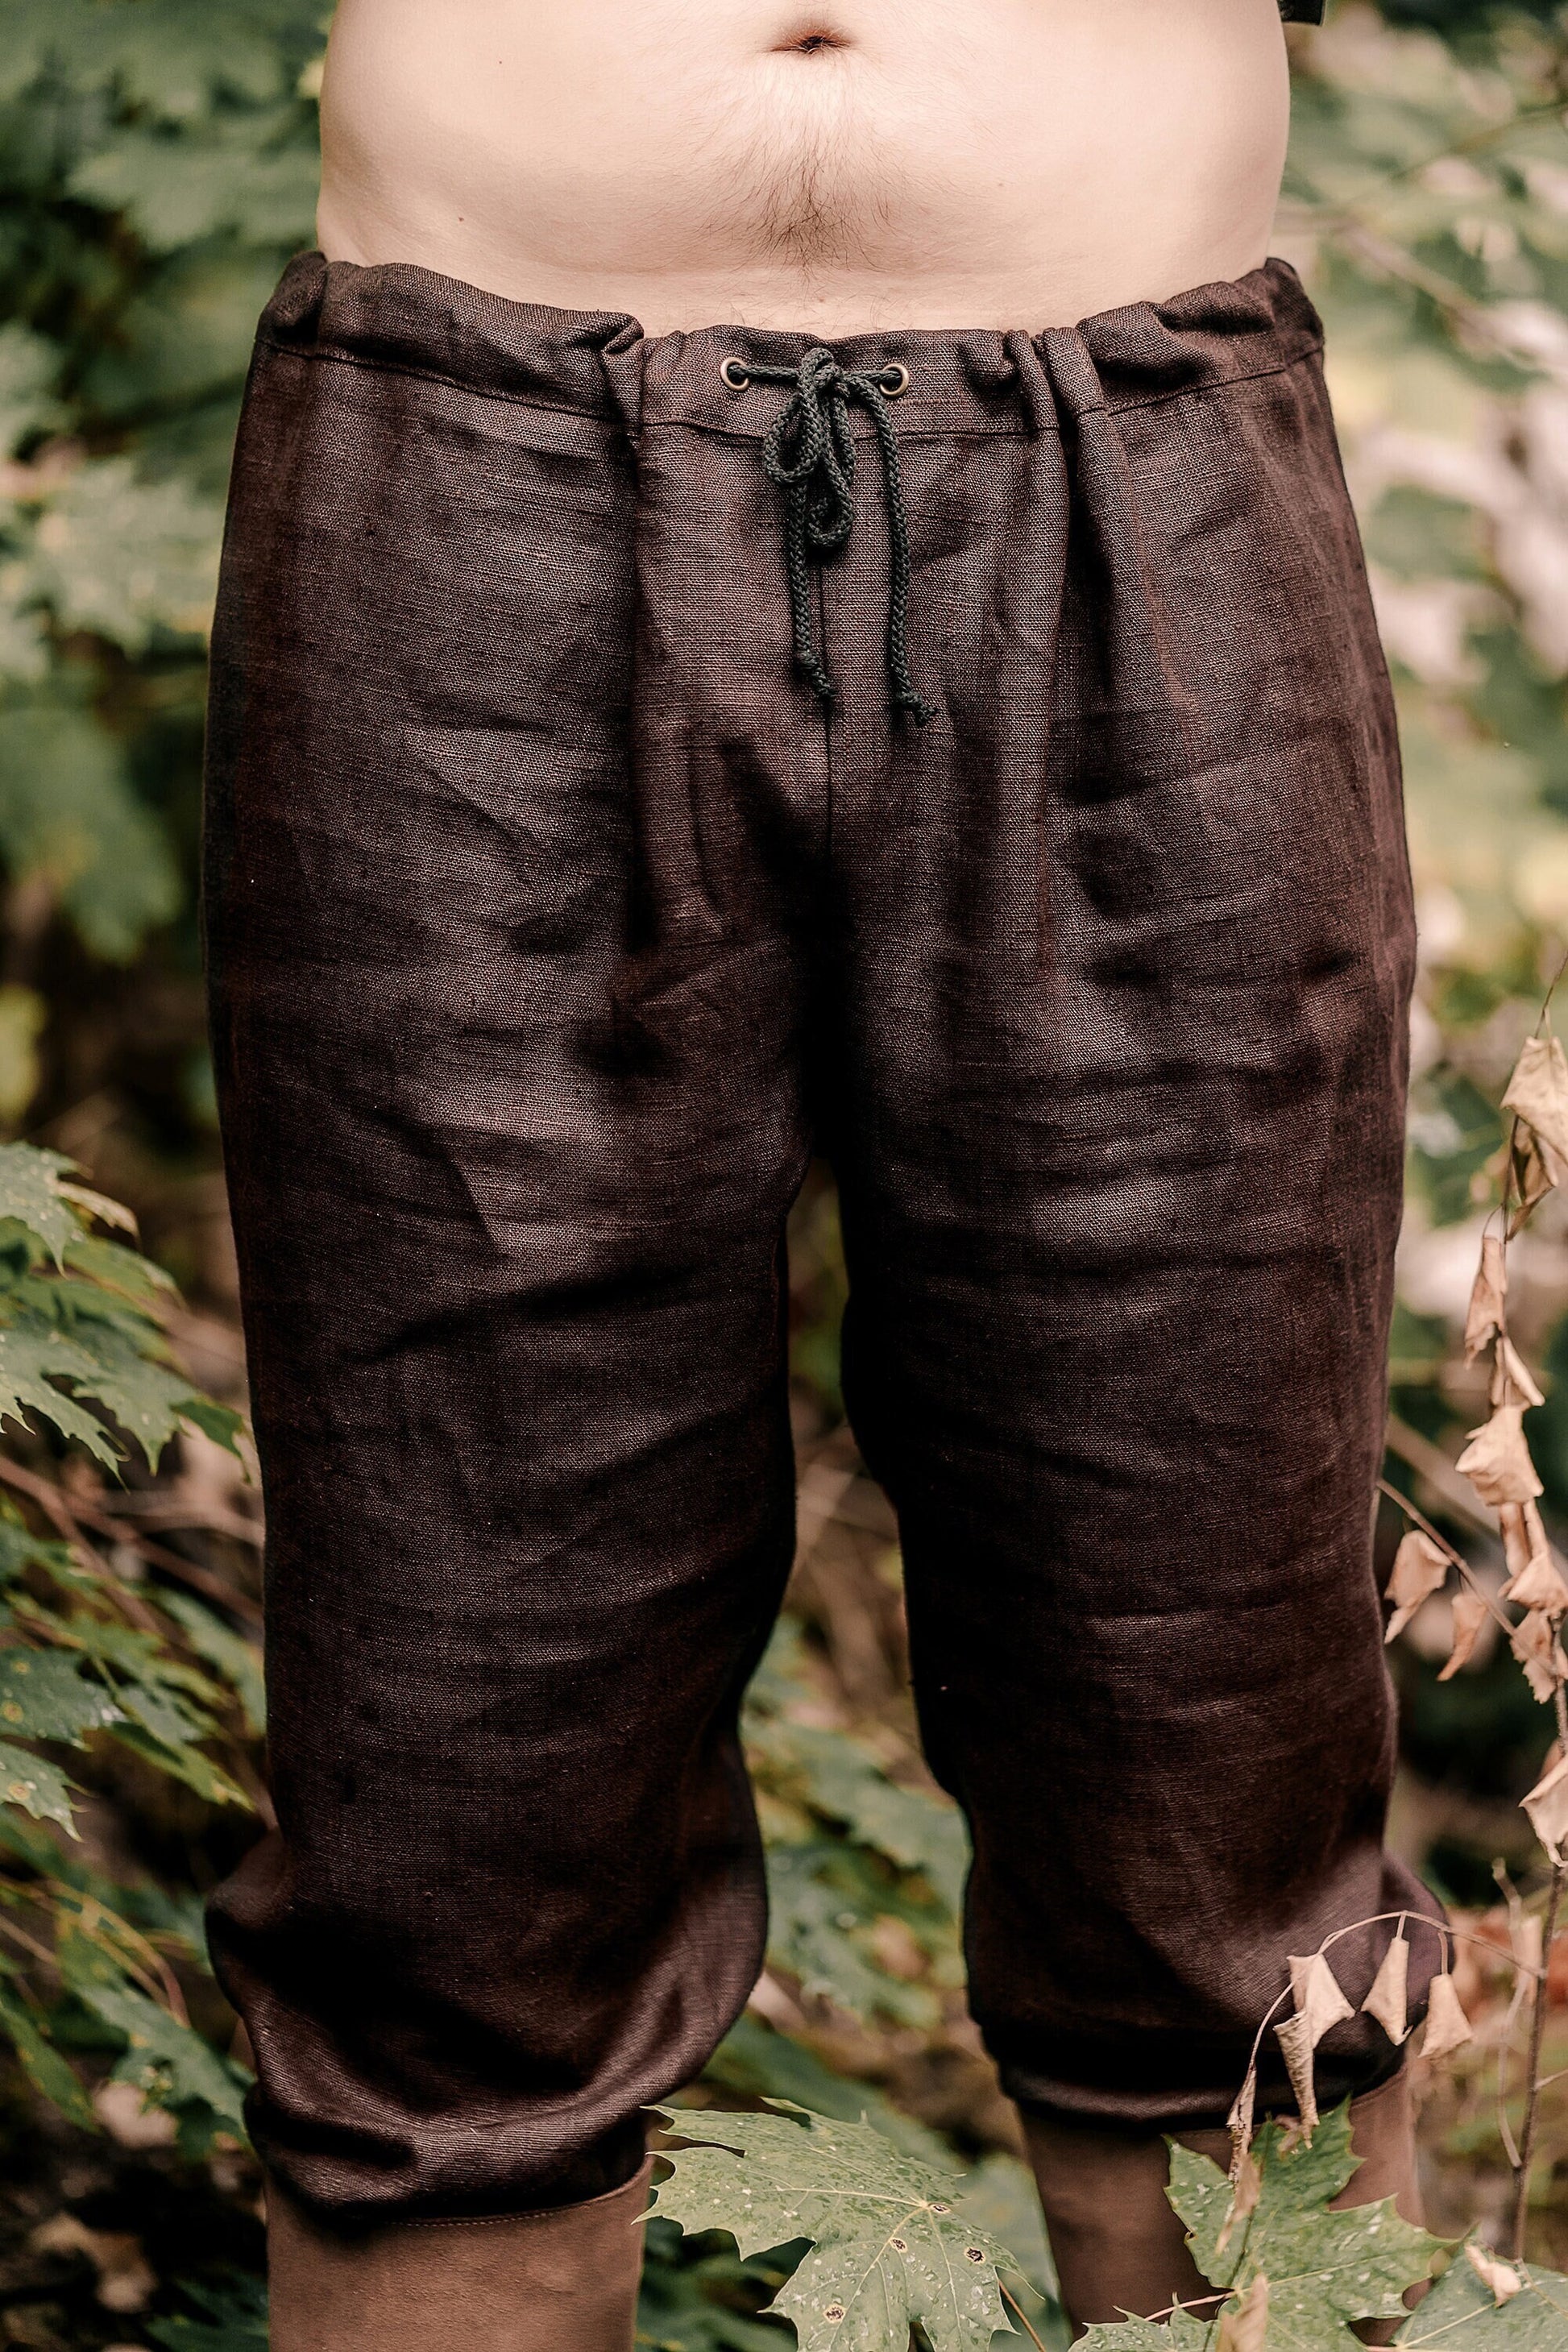 Basic Early Medieval Linen Pants/trousers for Viking and Slavic